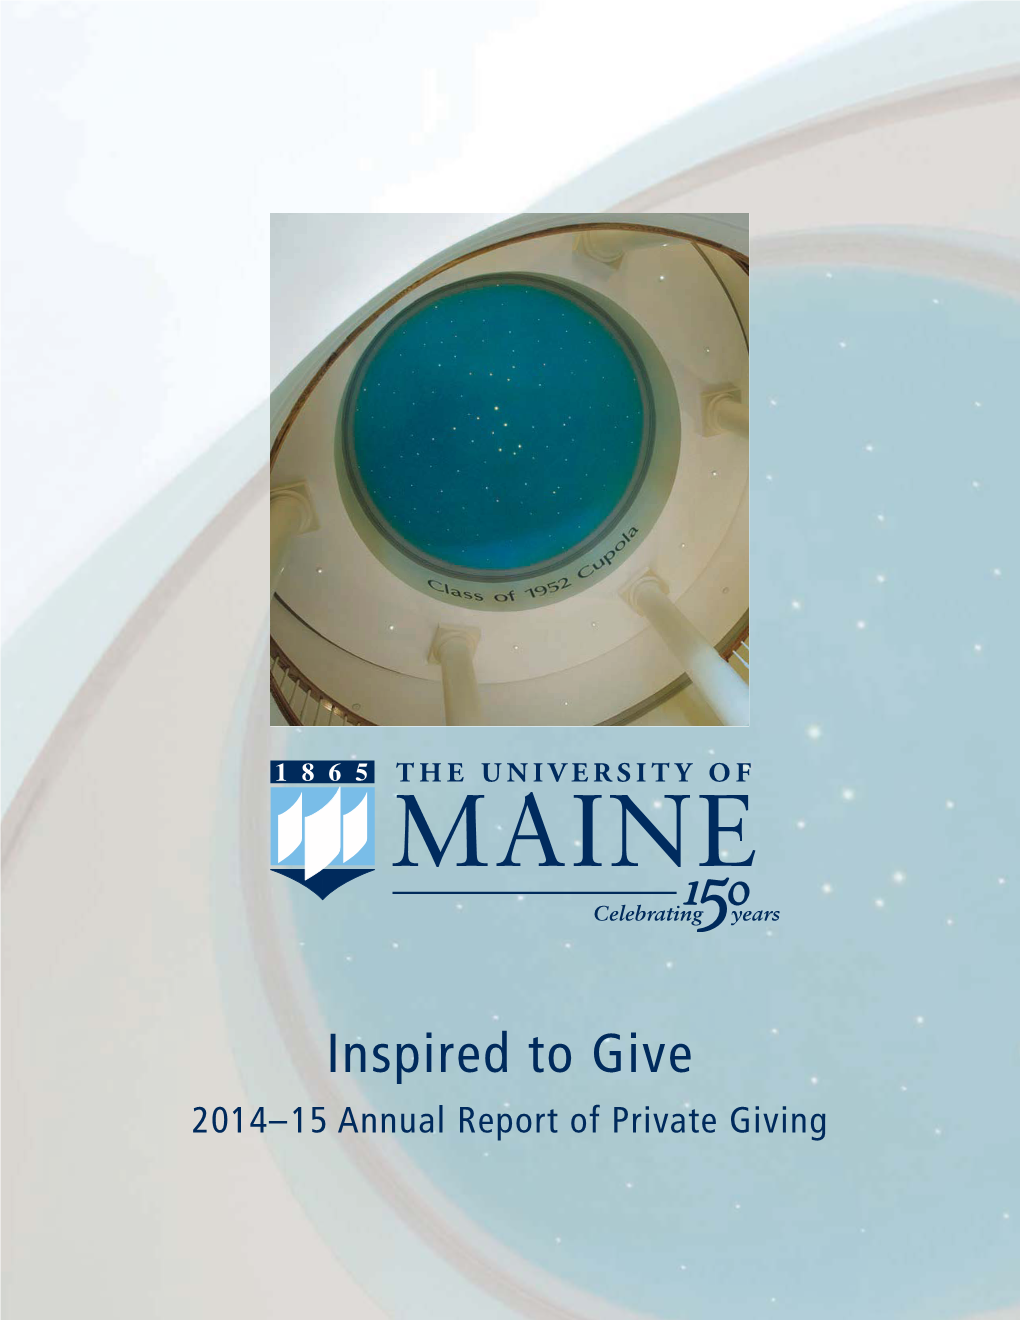 Inspired to Give: 2014-15 Annual Report of Private Giving